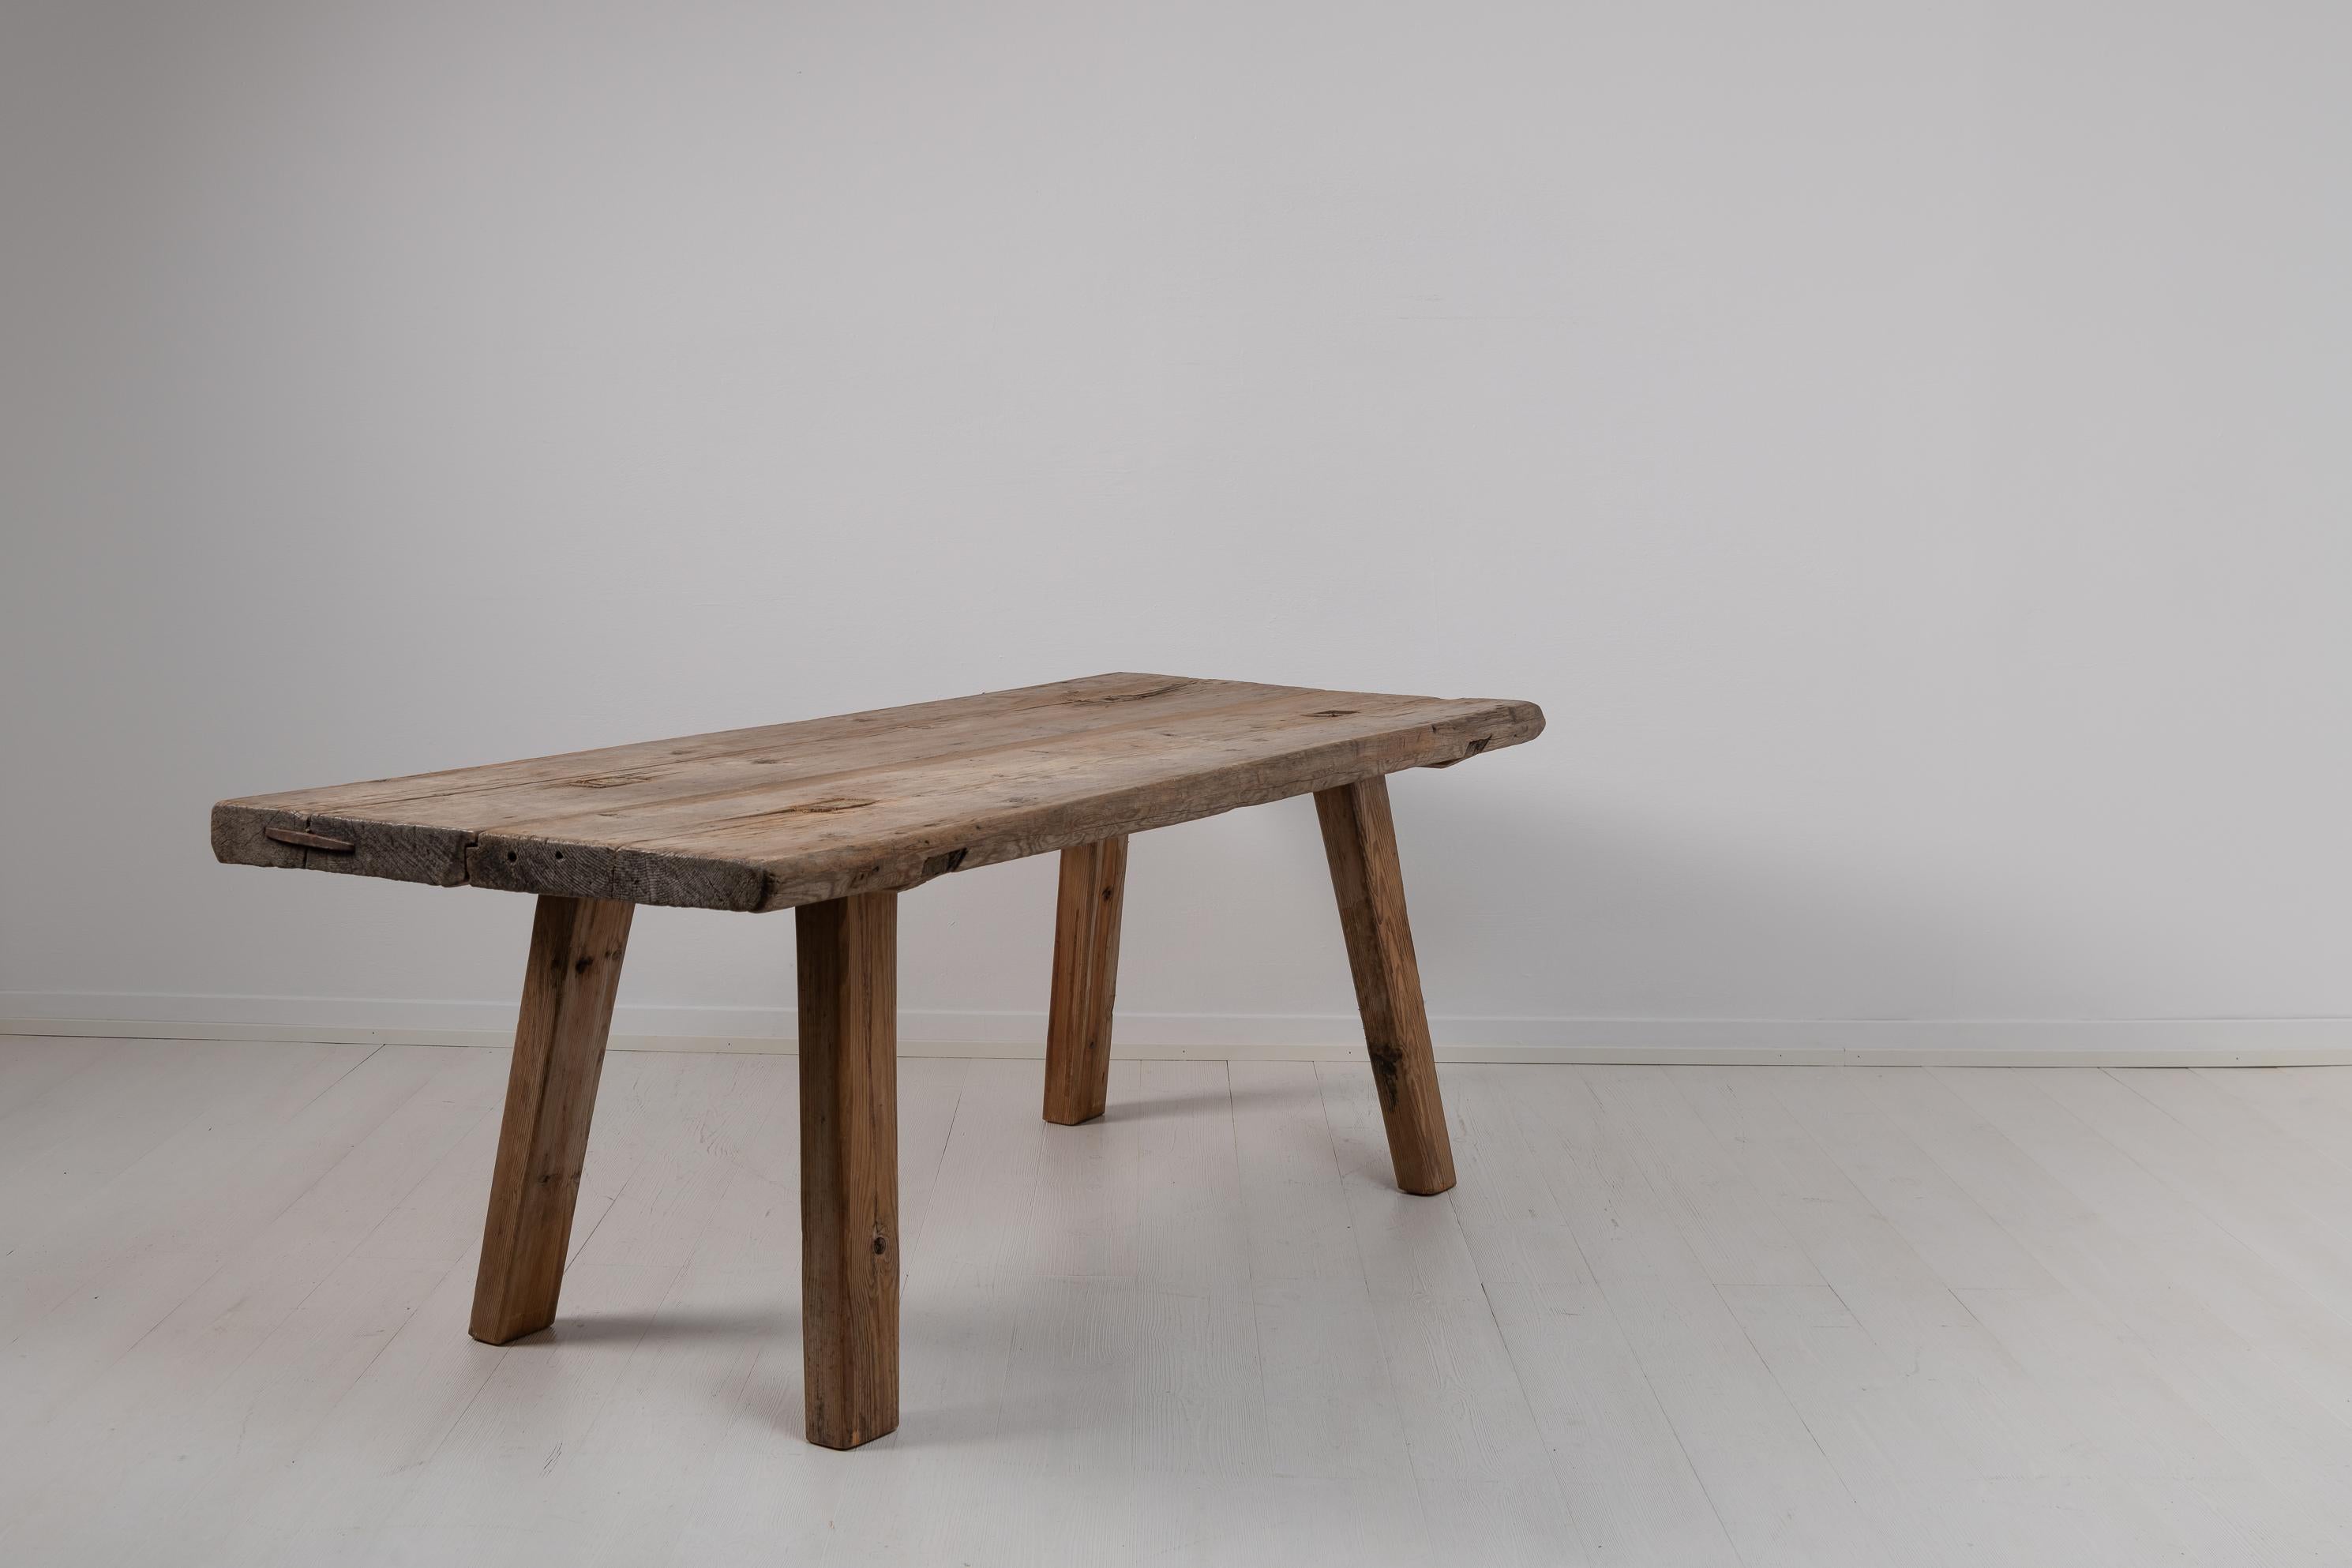 Late 18th Century Swedish Rustic Folk Art Pine Table  In Good Condition For Sale In Kramfors, SE